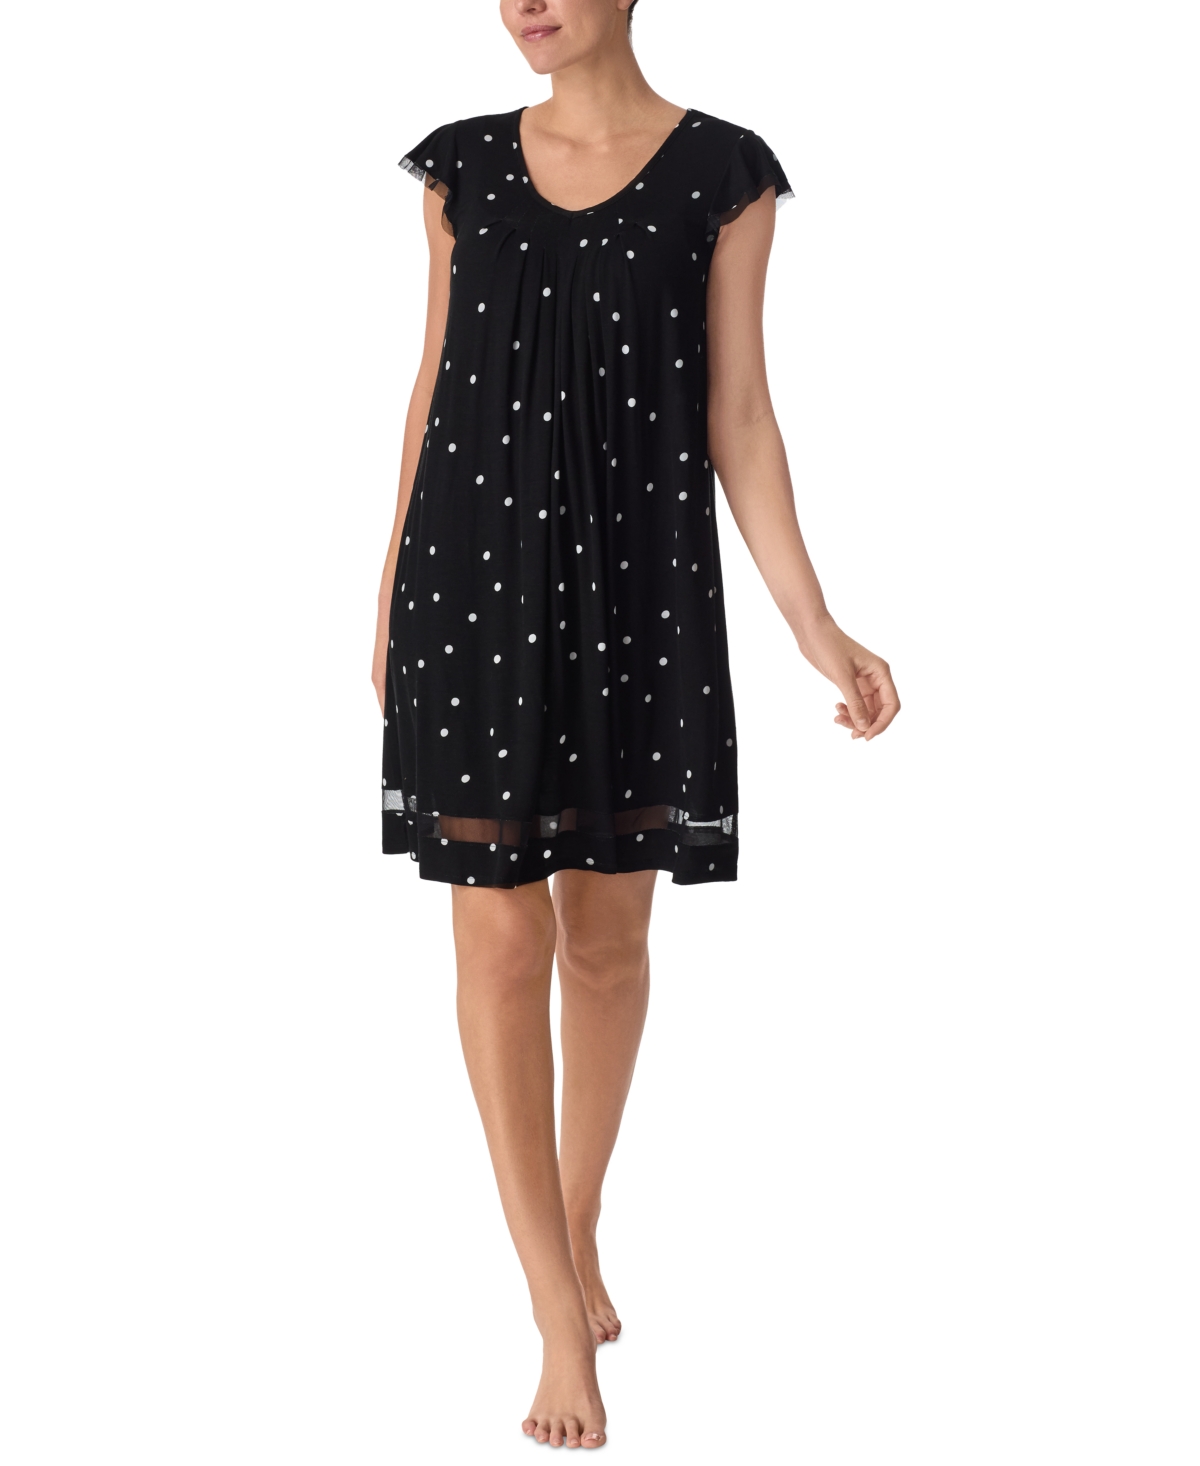 Yours to Love Short Sleeve Nightgown - Grey Dots